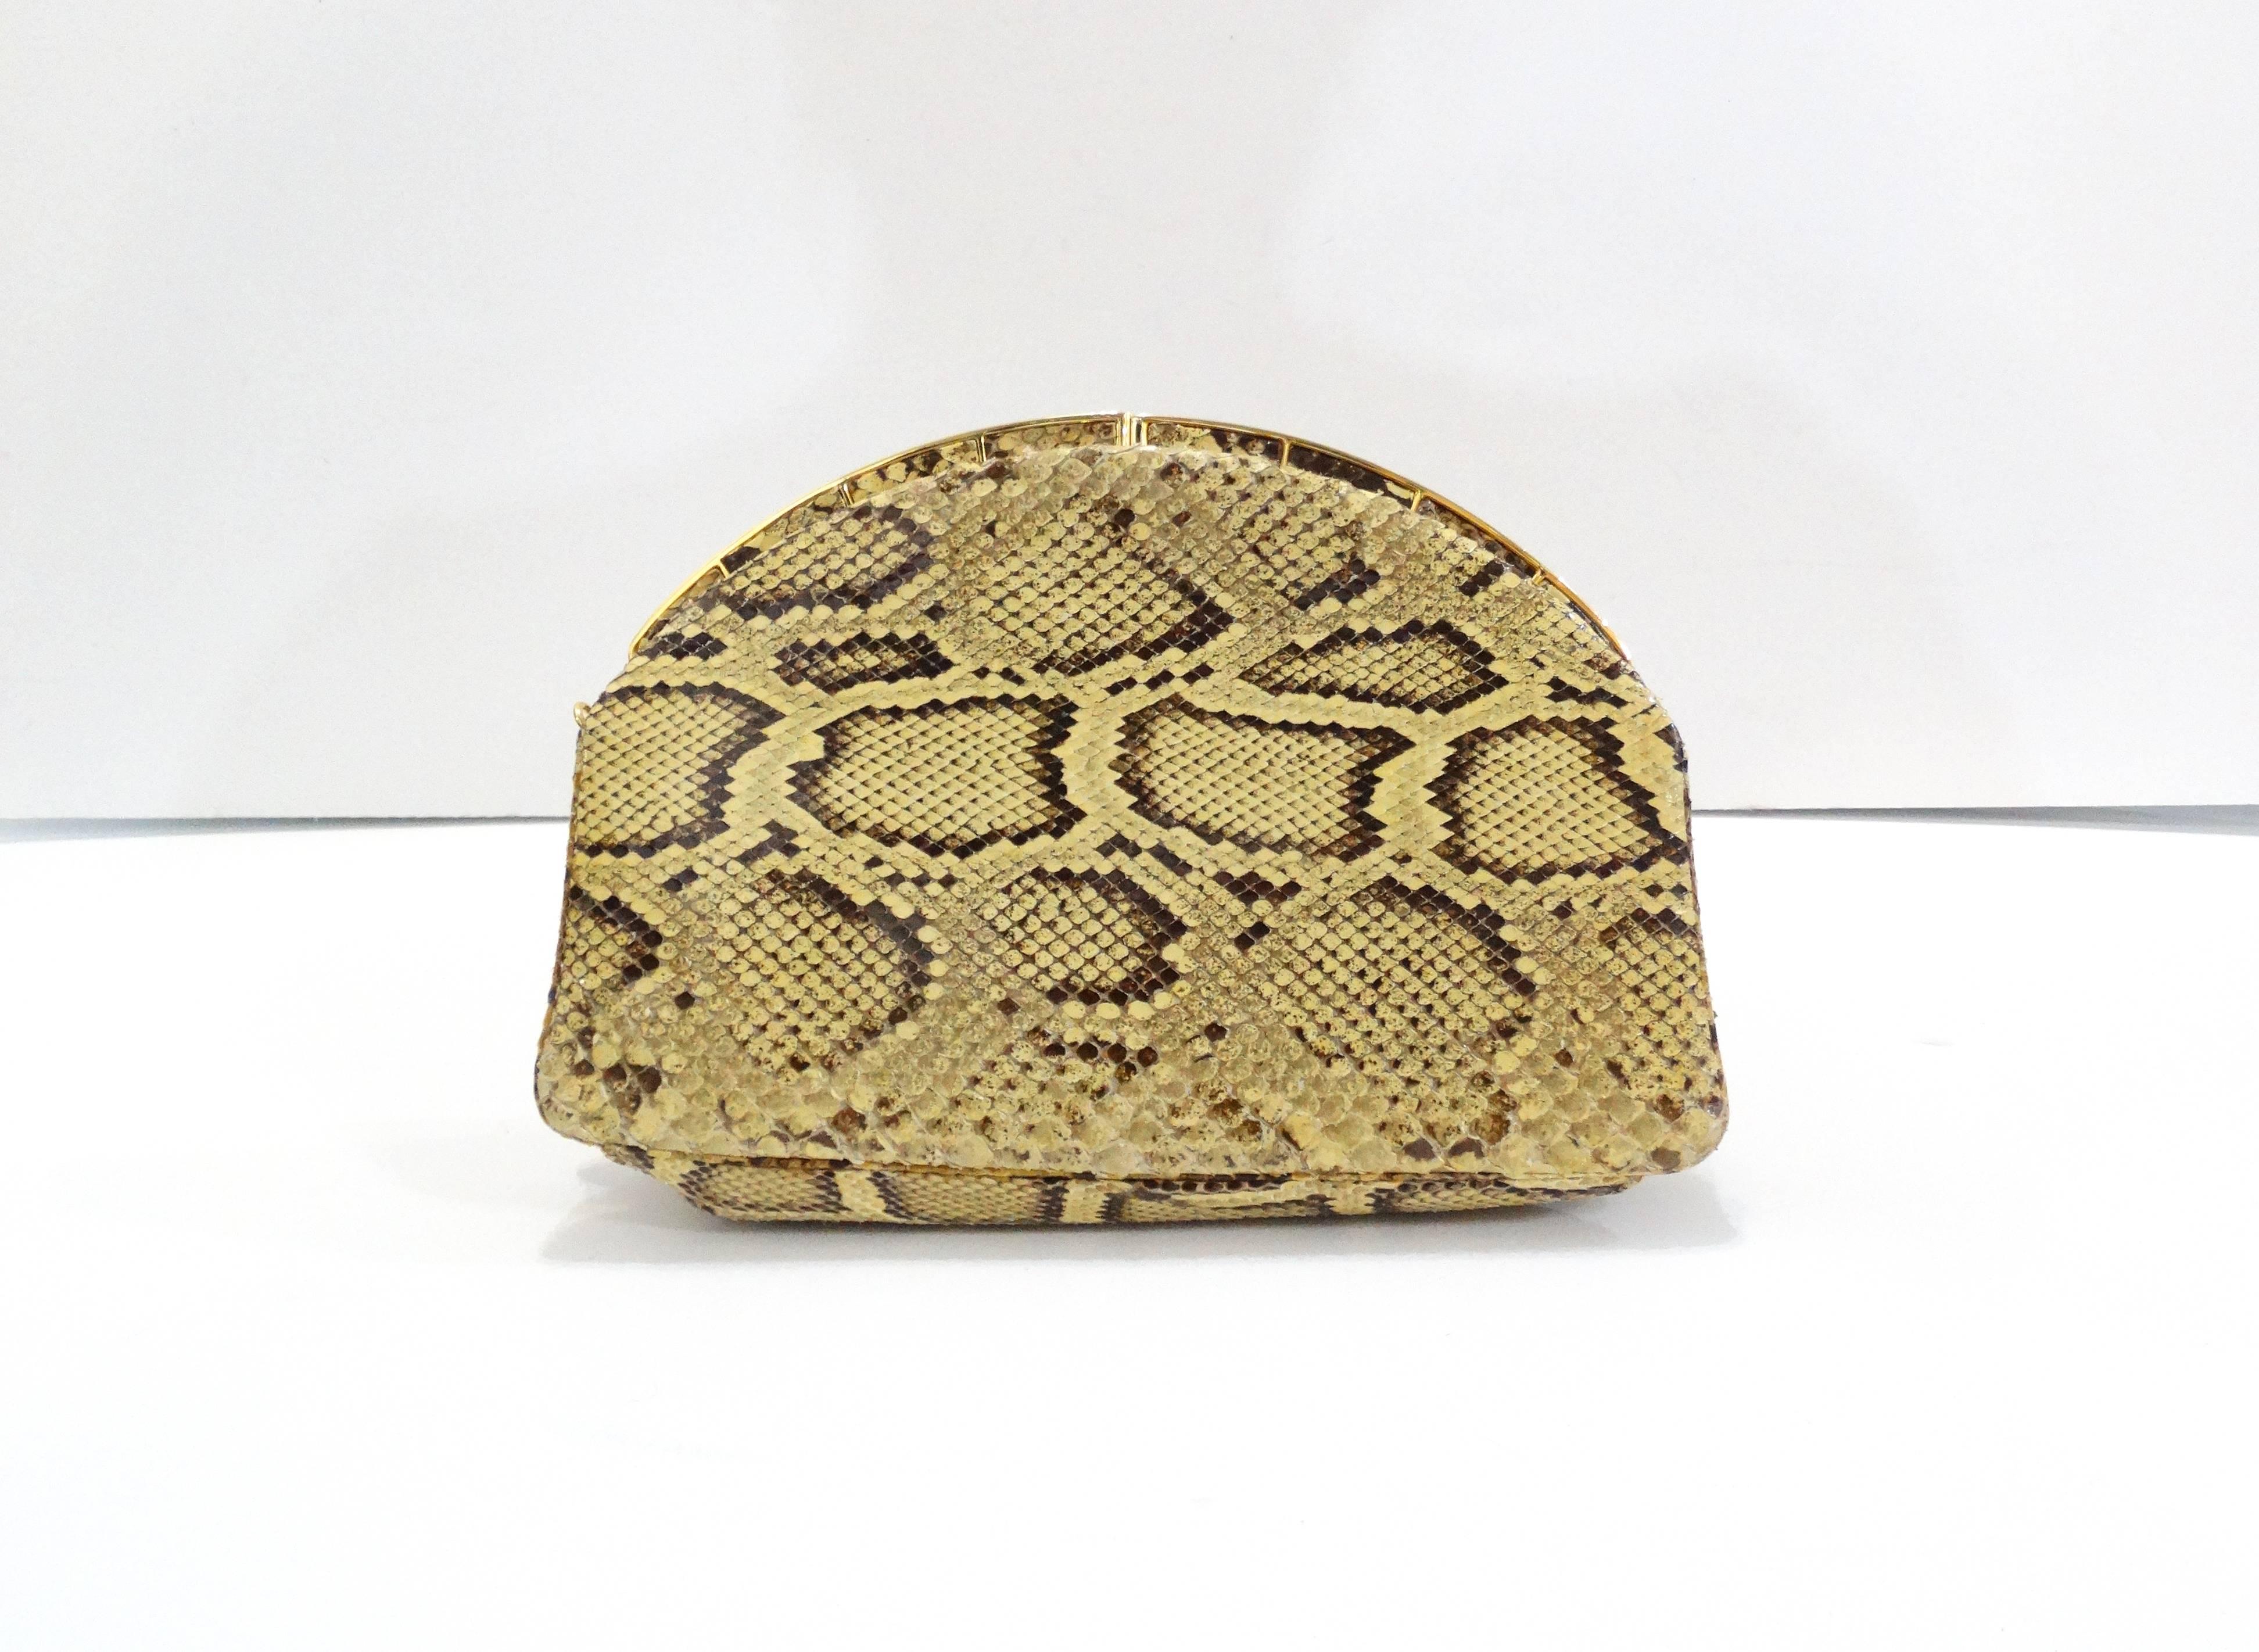 Gorgeous Judith Leiber evening bag made of genuine python snakeskin! Easily worn across the body with thin gold chain. Frame-type clasp closure that snaps open and closed. Chain is easily detached and tucked away for use as a clutch. Comes with it's